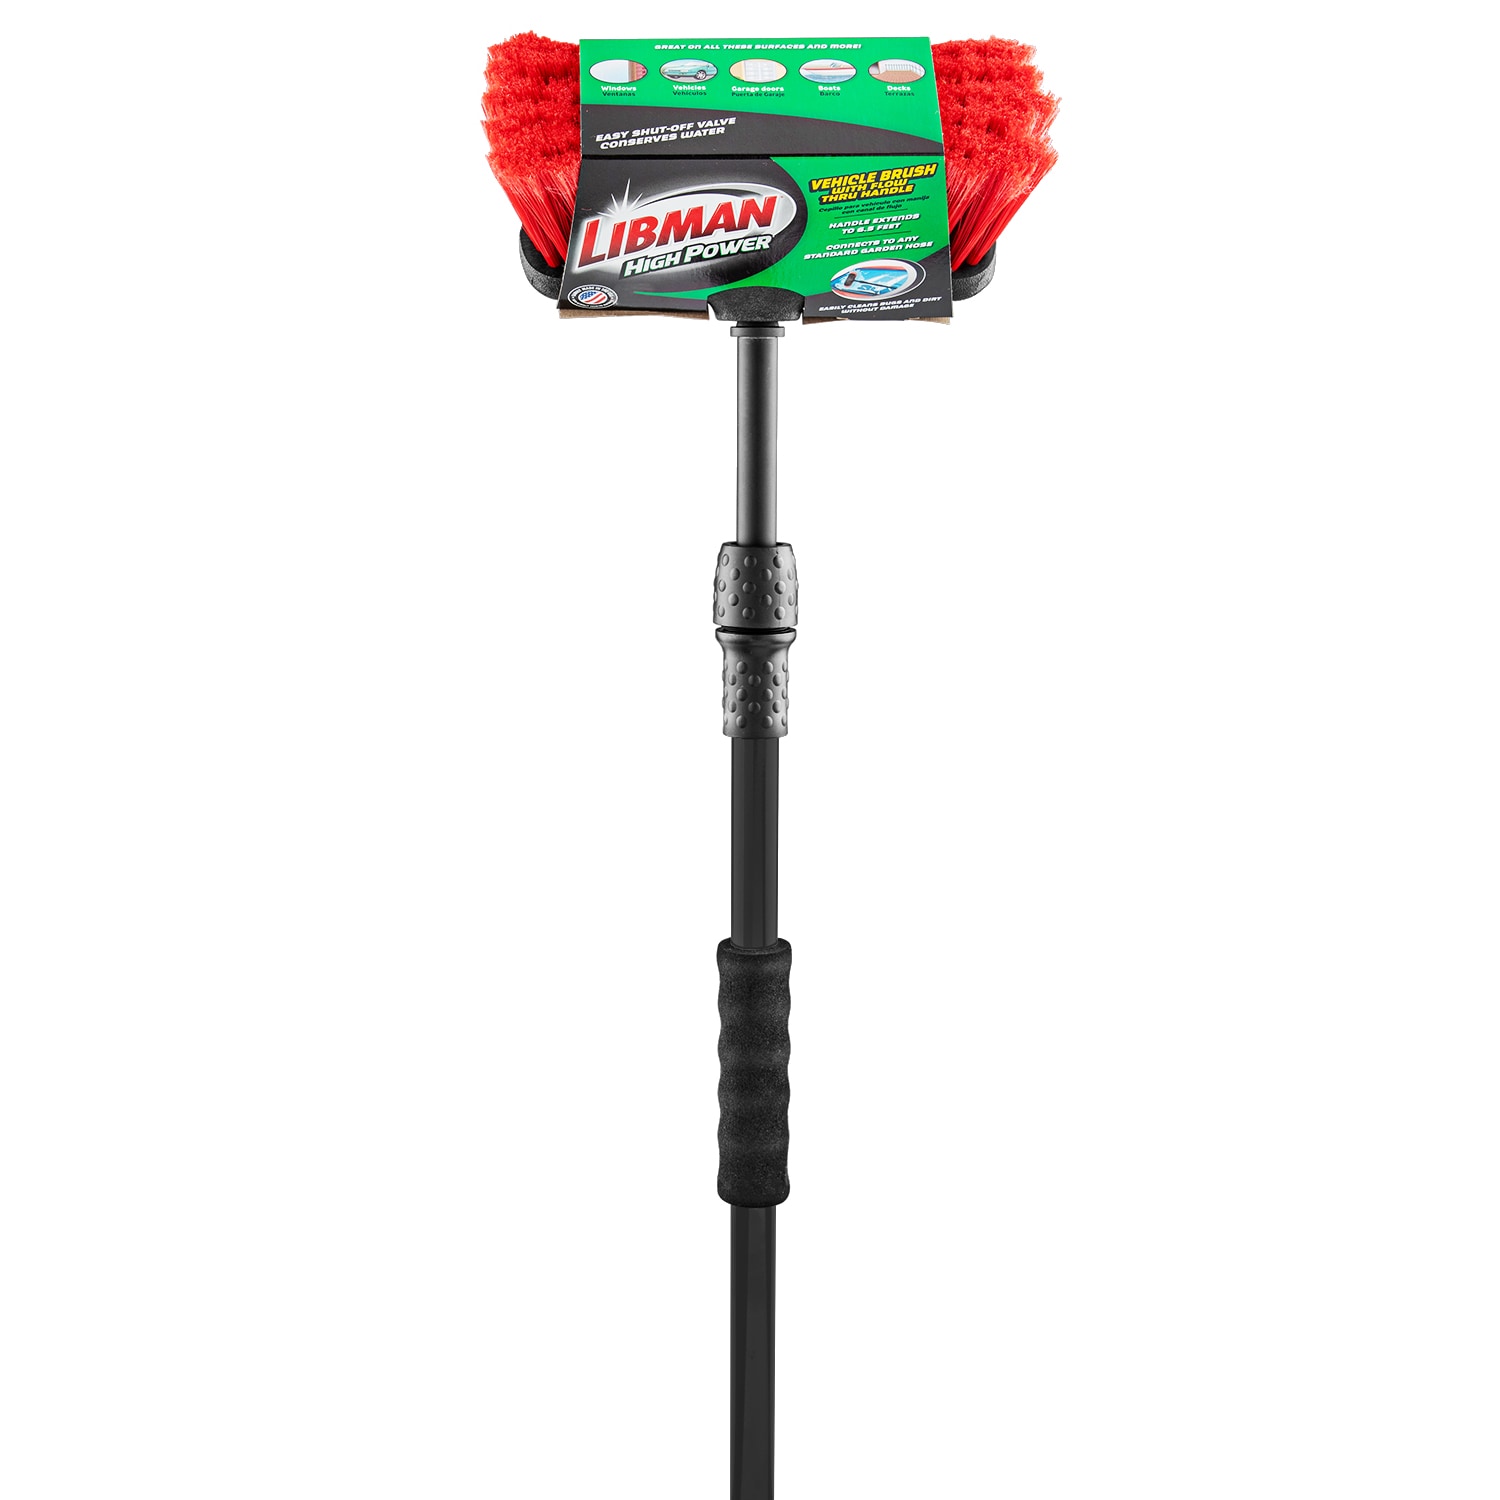 Hopkins Microfiber Soft General Wash Brush in the Automotive